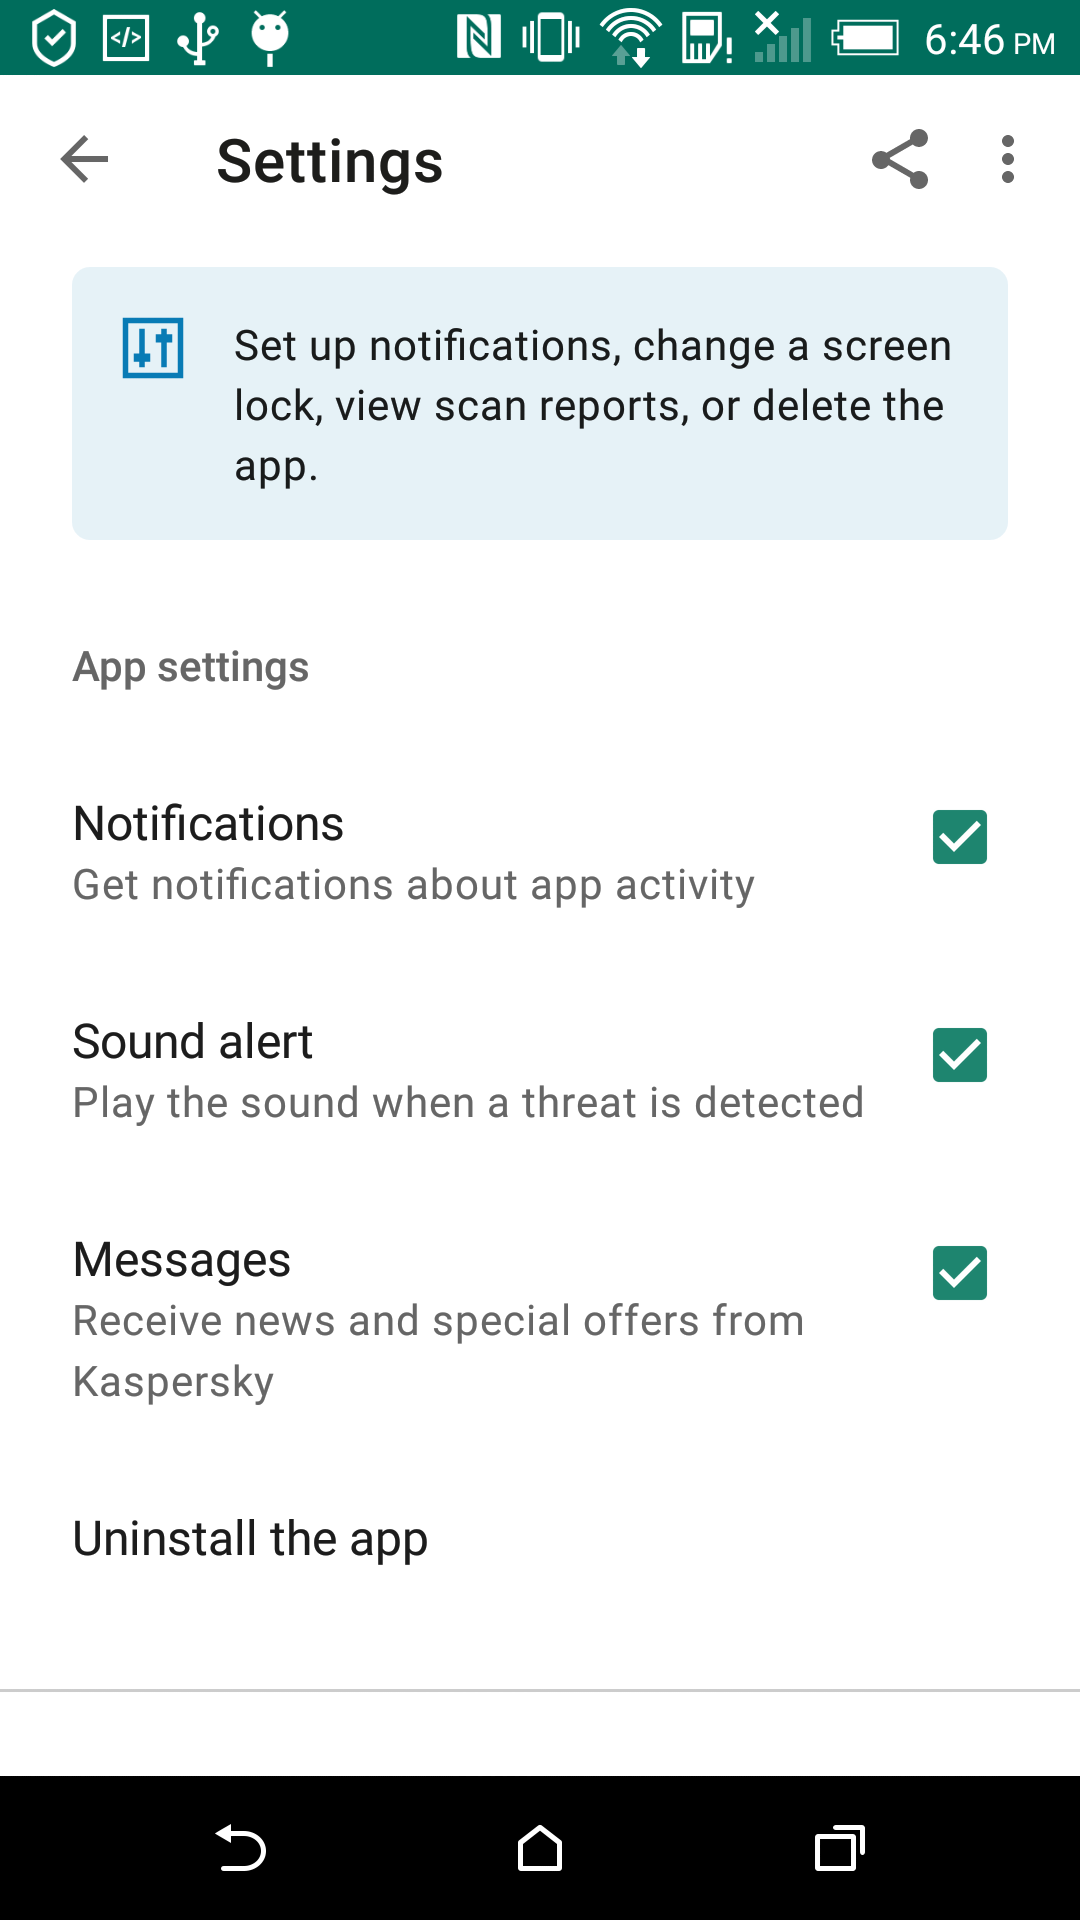 kaspersky for android mobile